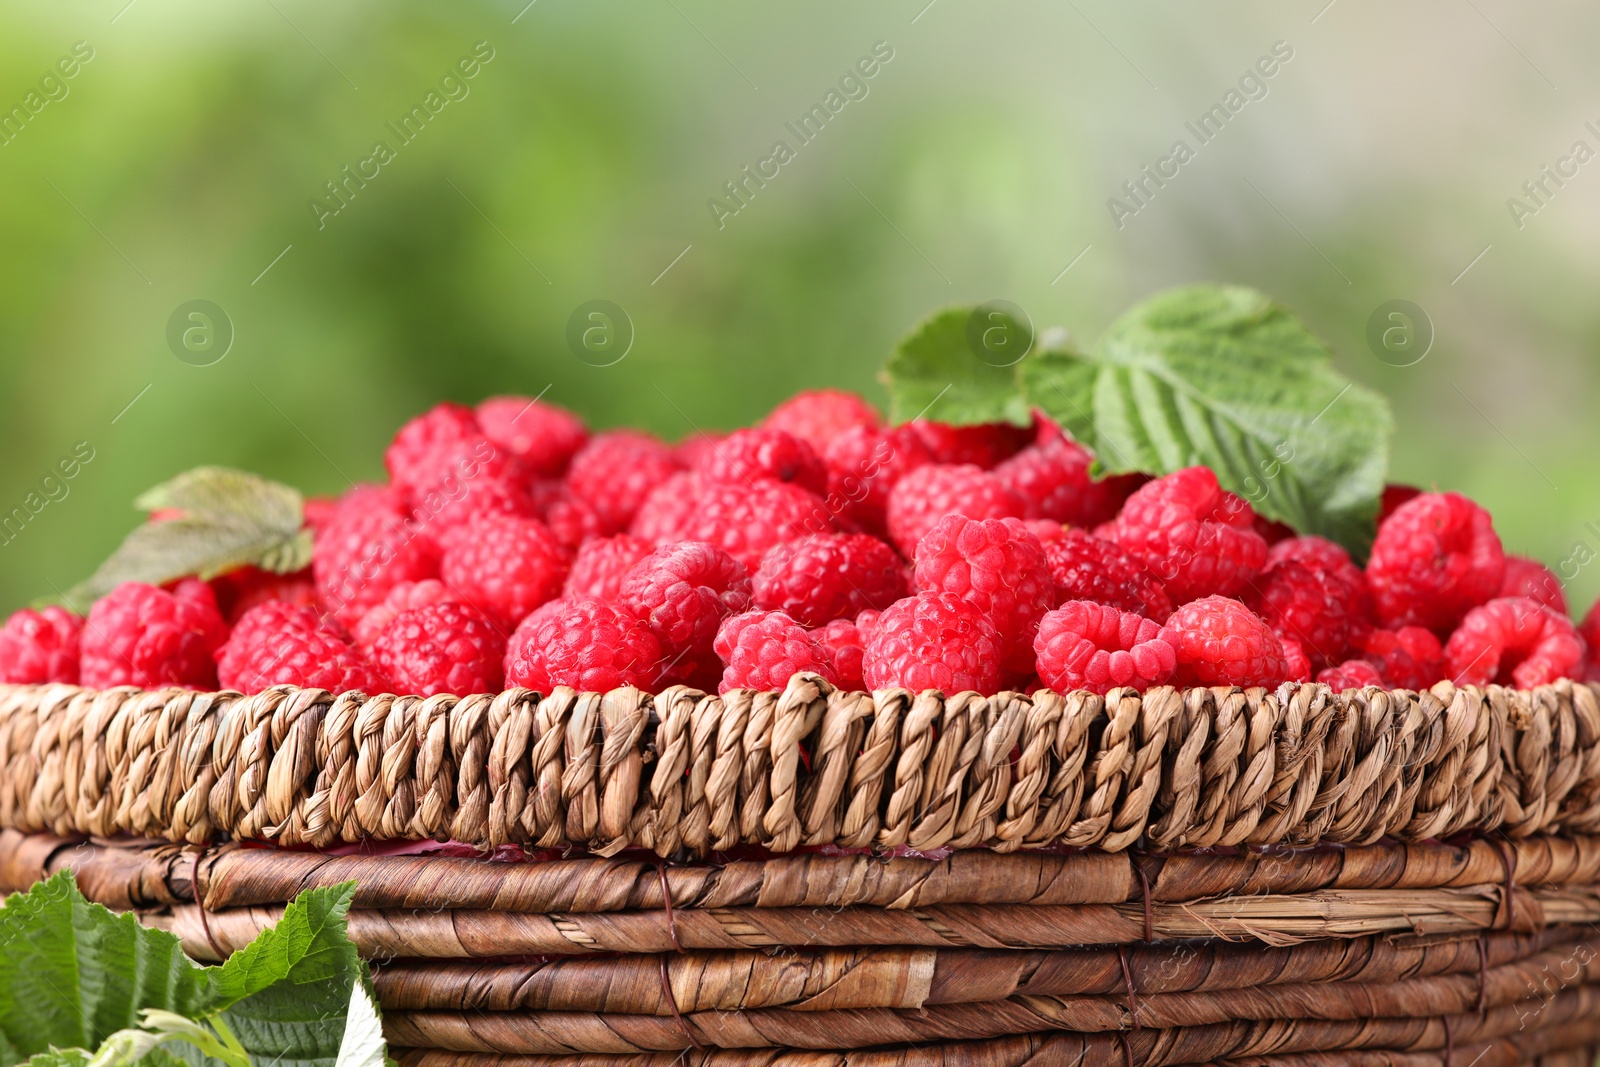 Photo of Wicker basket with tasty ripe raspberries and leaves against blurred green background, closeup